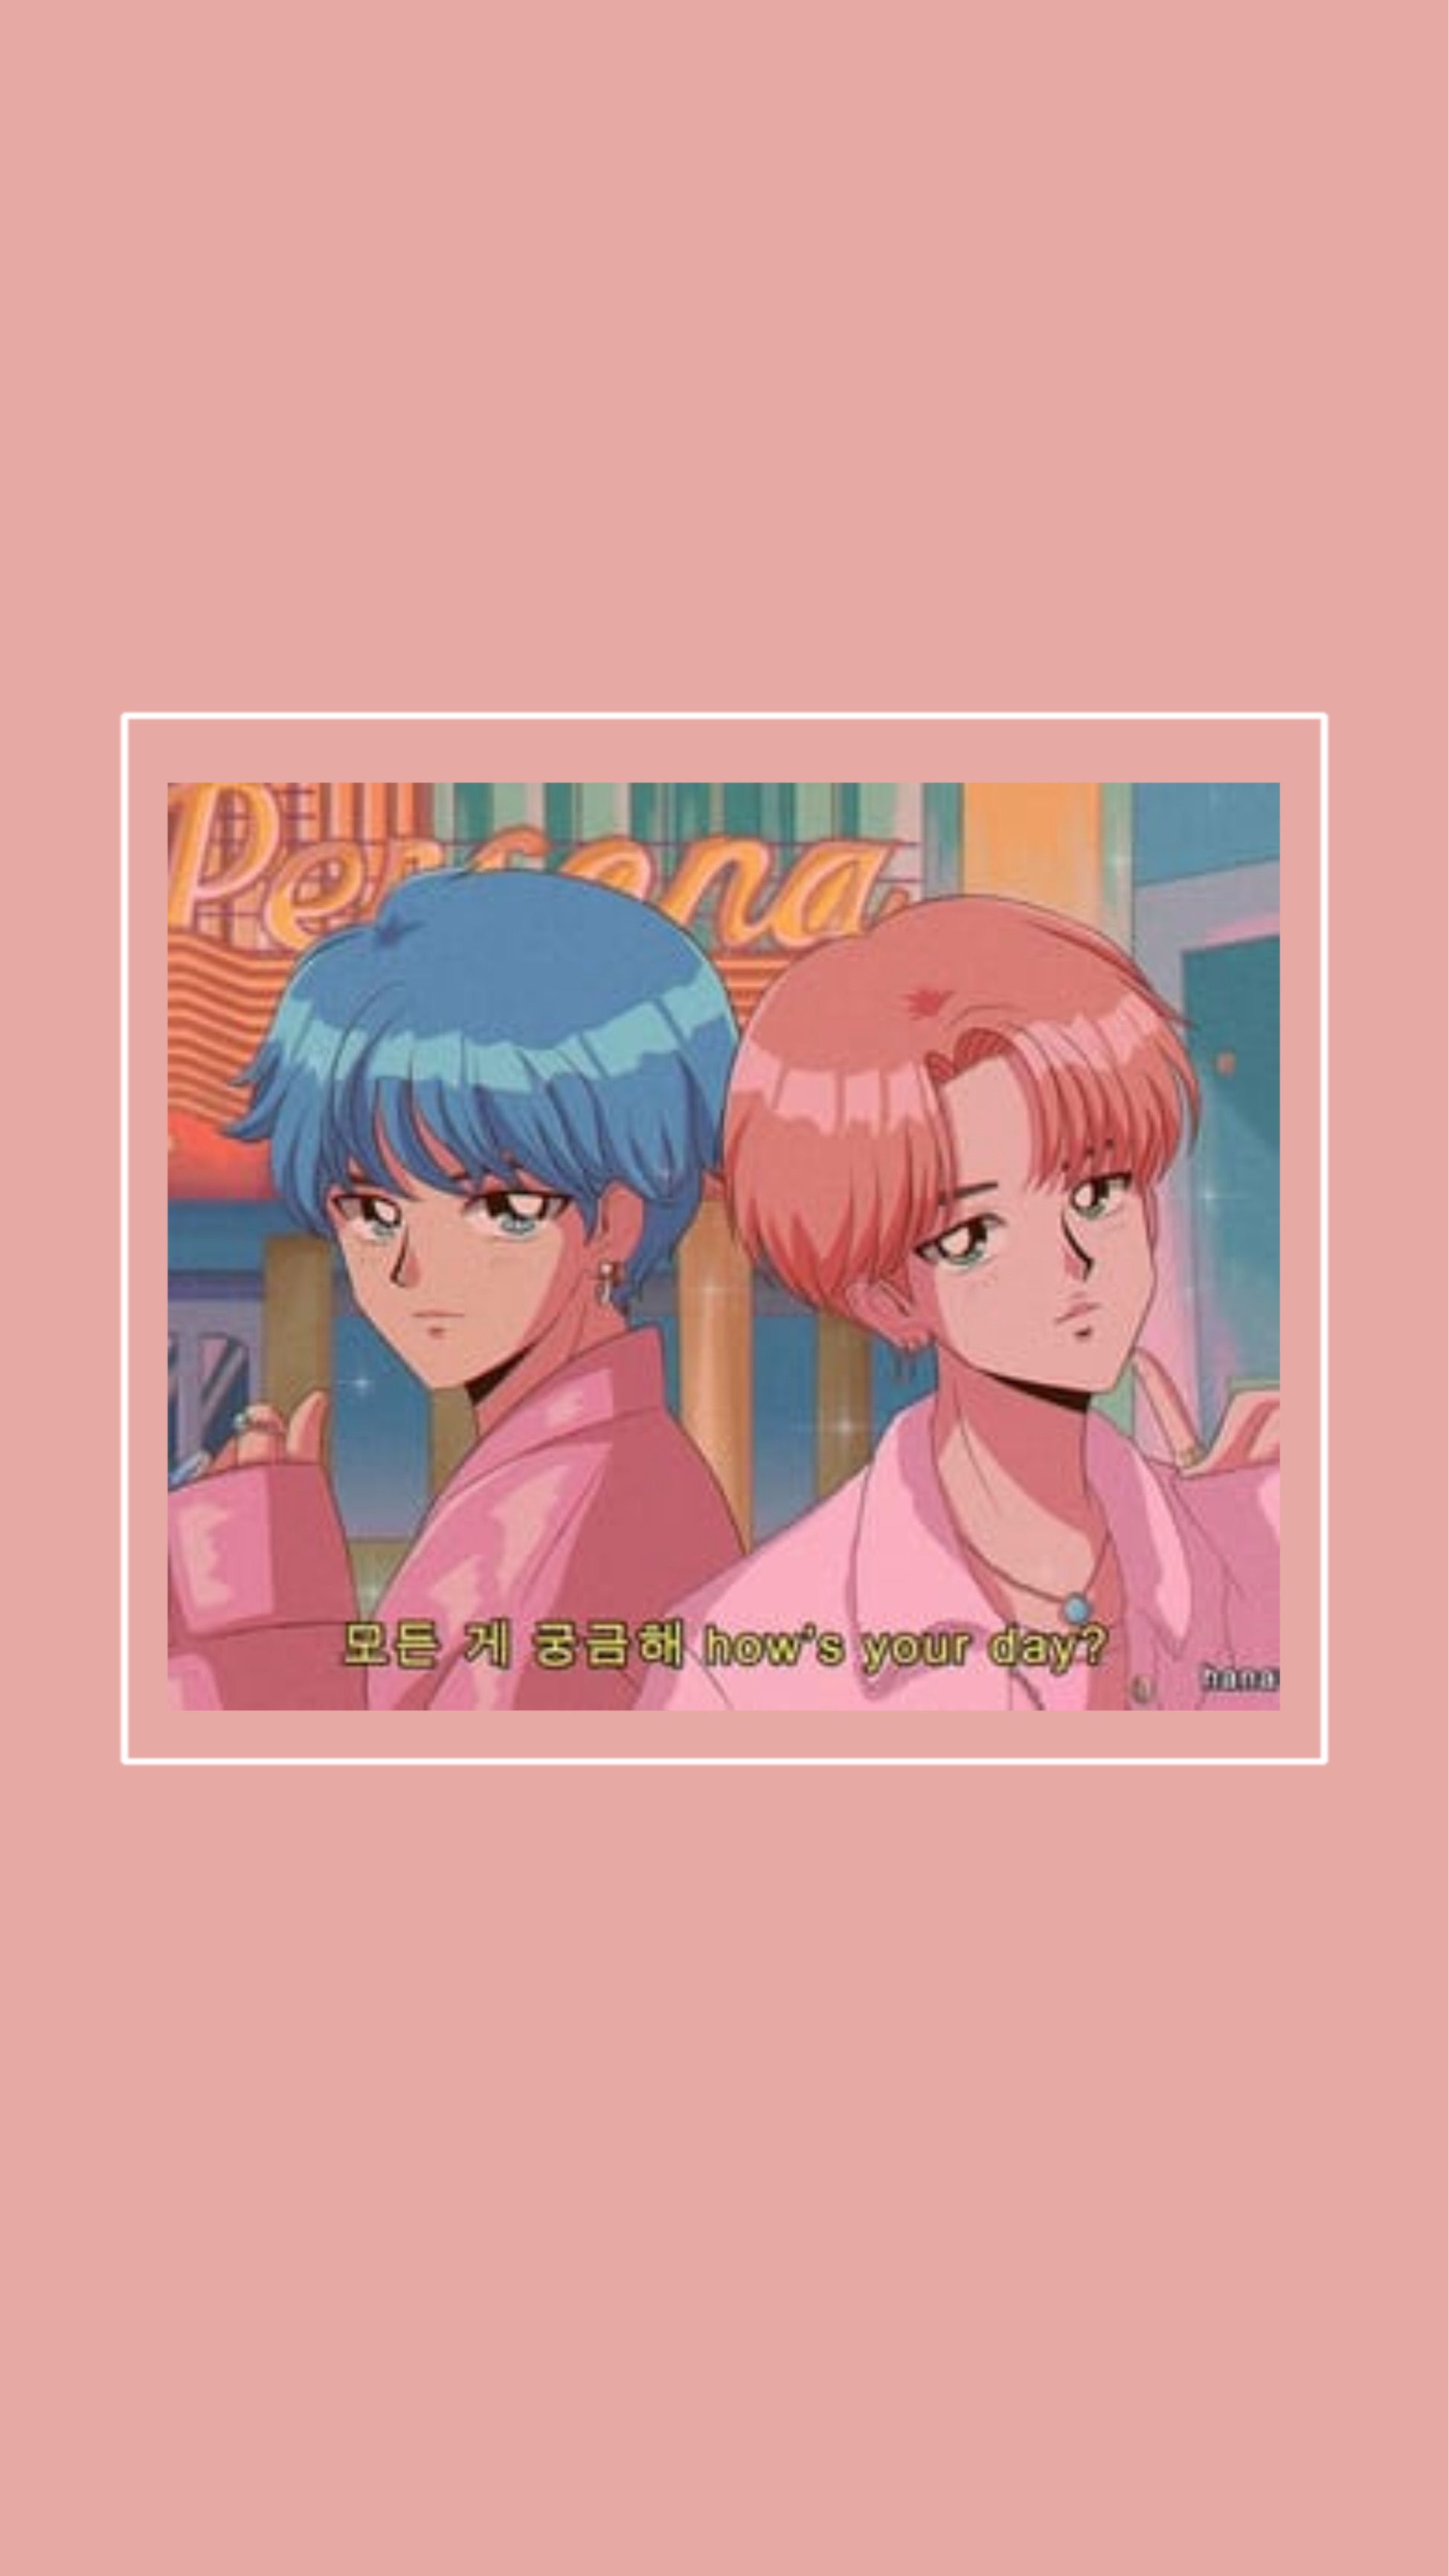 Anime 80s Aesthetic Wallpapers - Wallpaper Cave